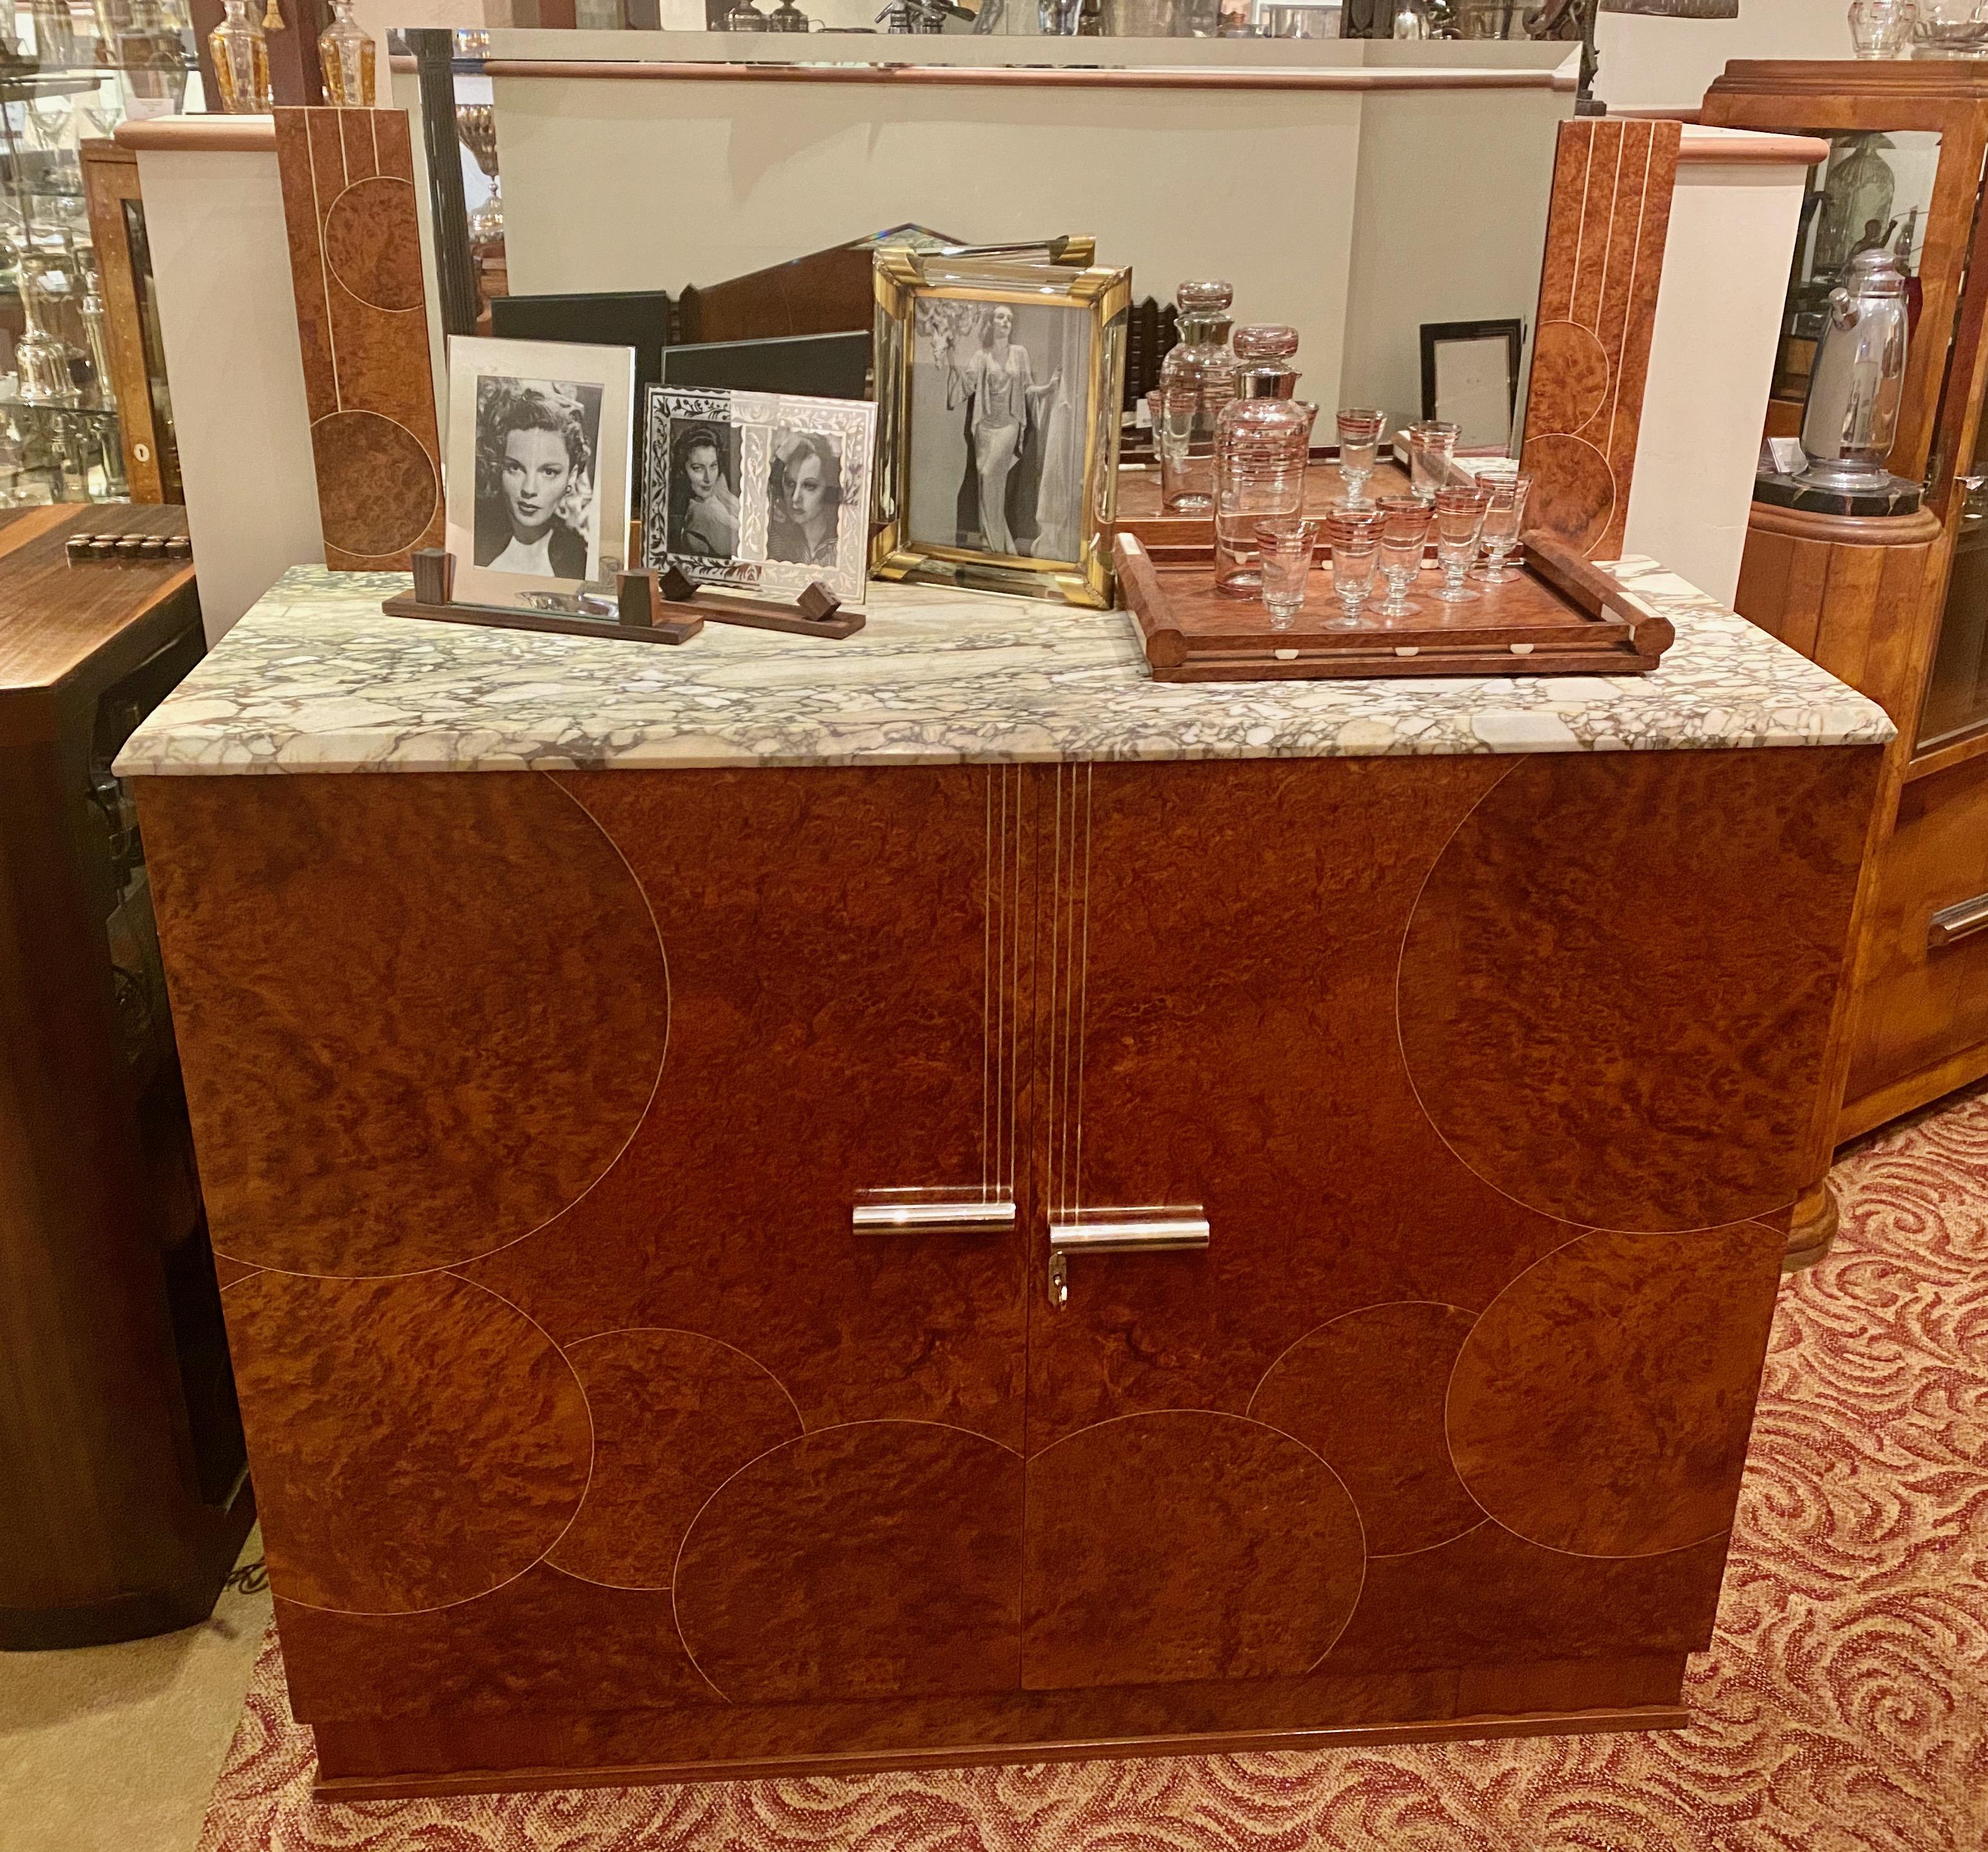 Art Deco French custom buffet of Amboyna burl wood with inlay. This custom book-matched amboyna cabinet of inlaid wood in a bubble motif is accented by a thin piece of metal which encircles each bubble. There is a range of quality details throughout